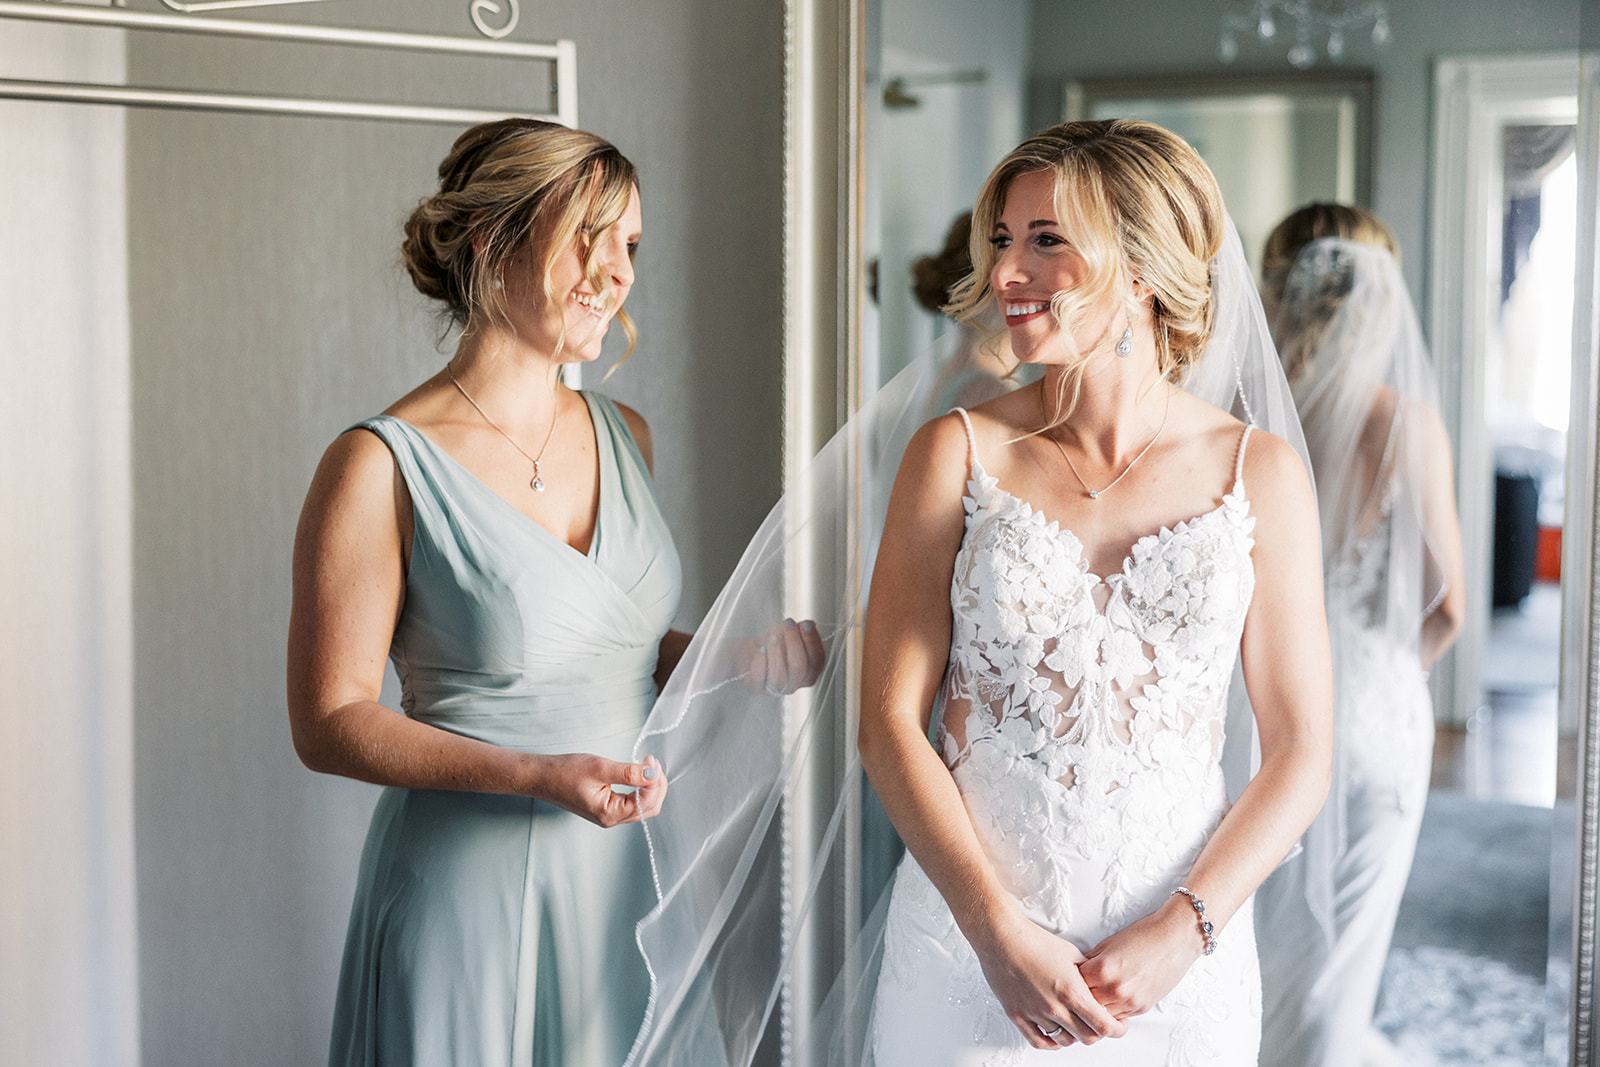 A bride stands in a mirror getting ready with her bridesmaid